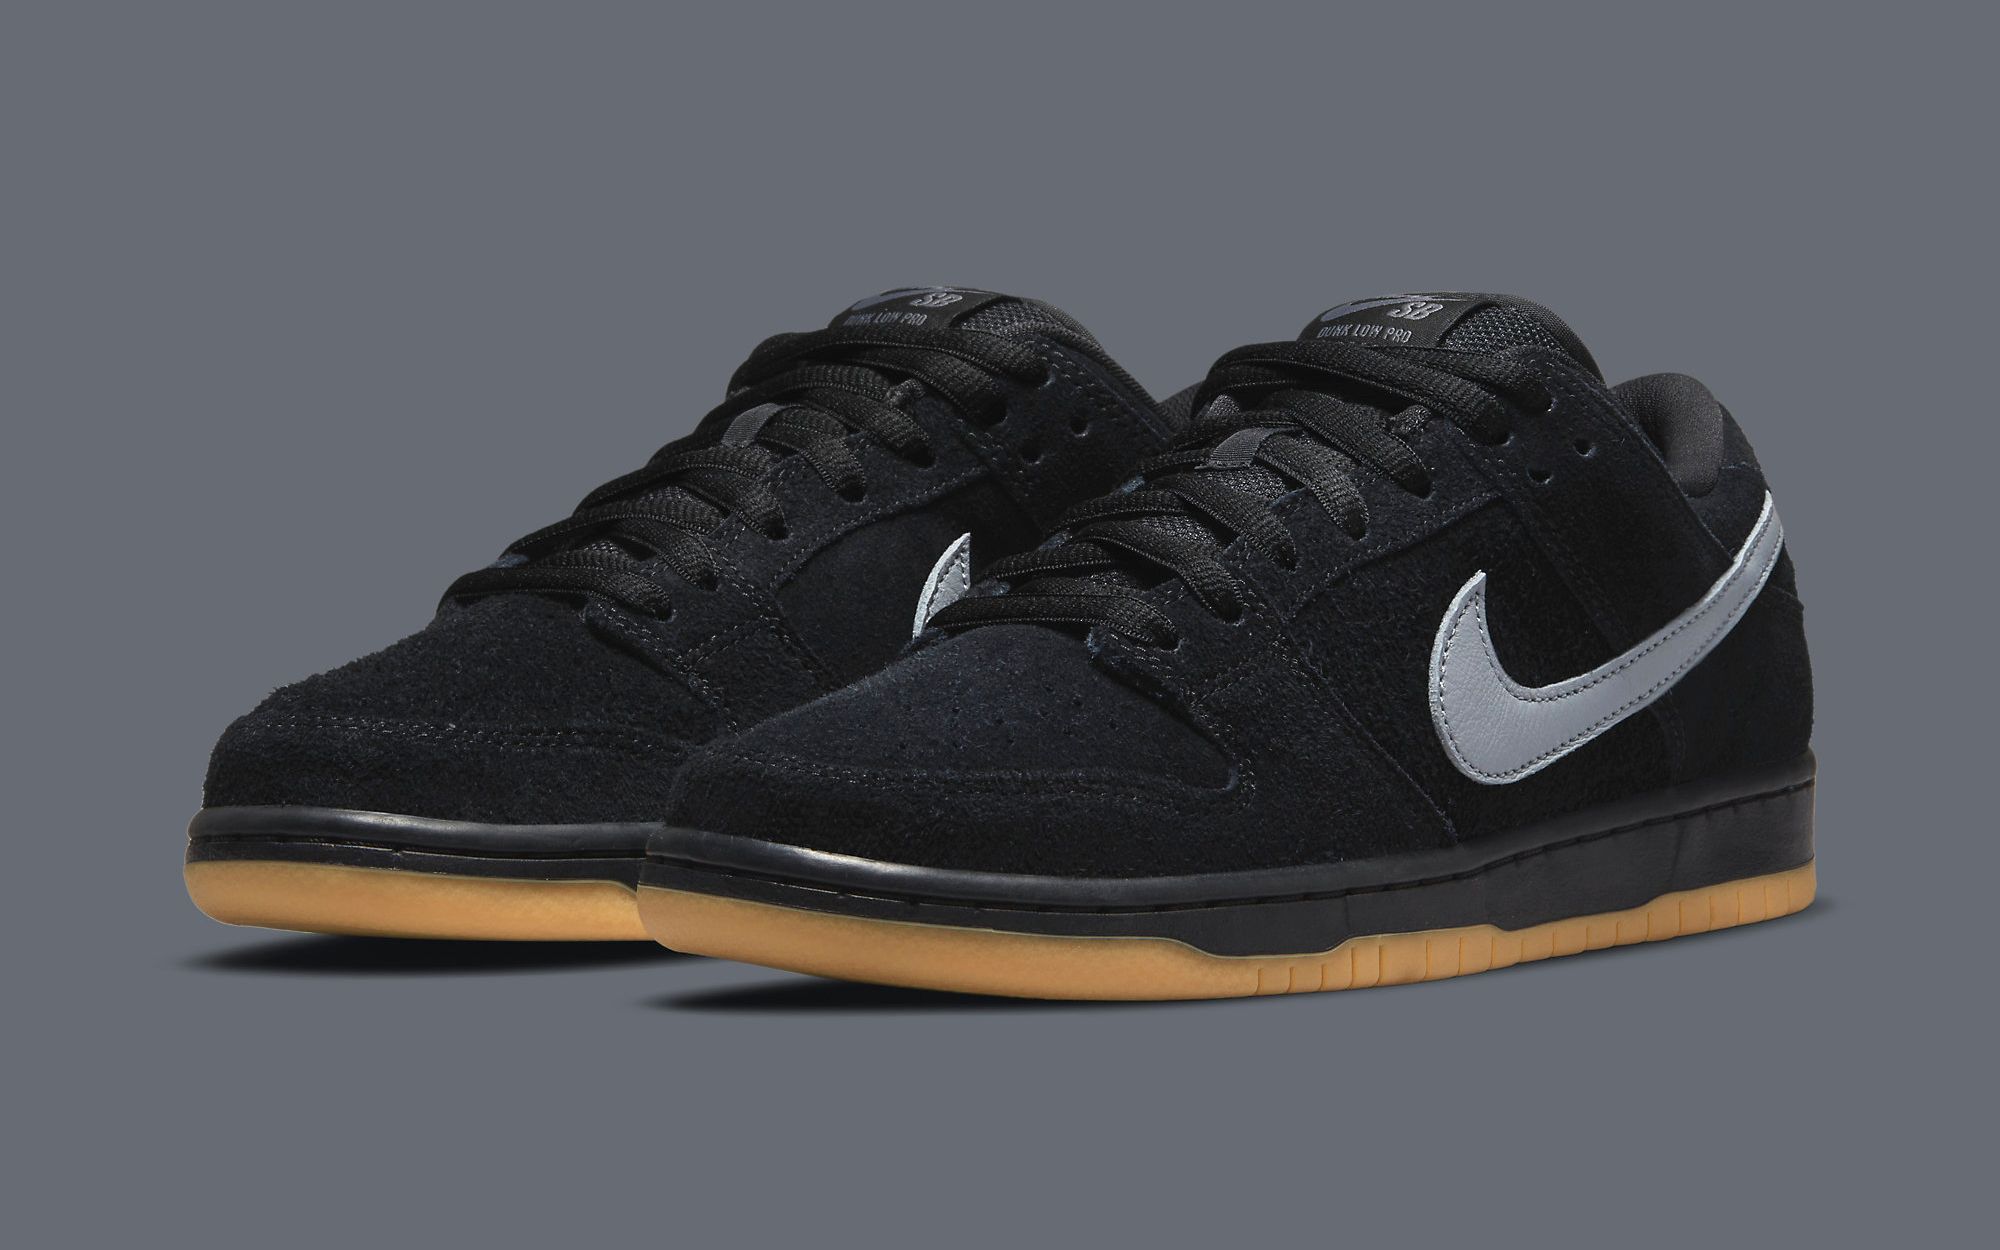 Where to Buy the Nike SB Dunk Low “Fog” | House of Heat°